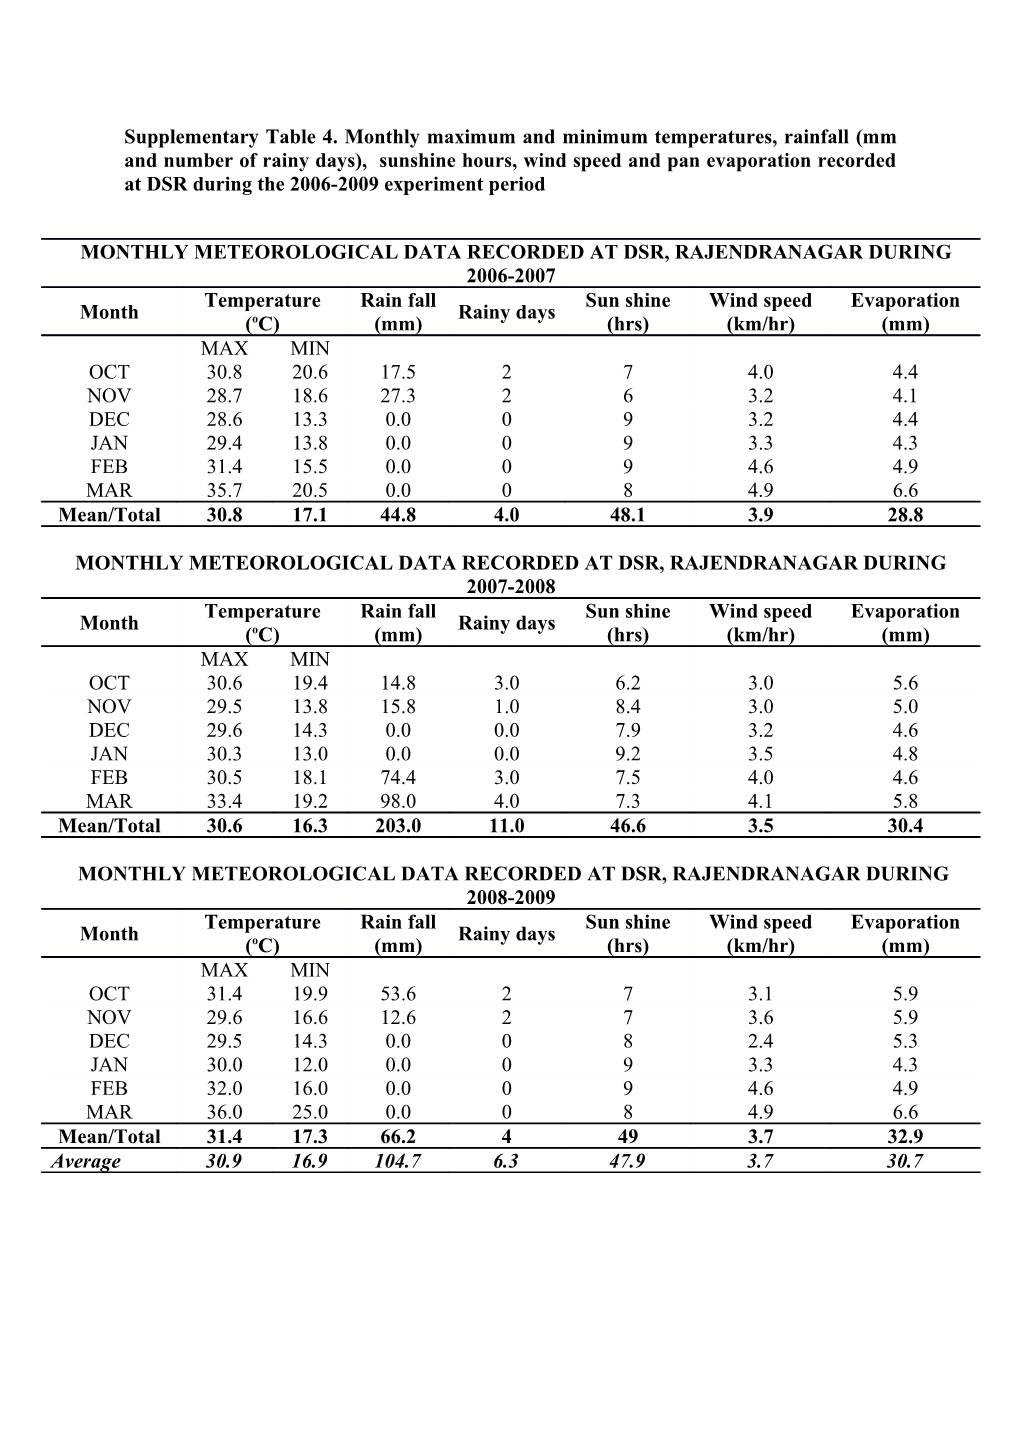 Supplementary Table 4. Monthly Maximum and Minimum Temperatures, Rainfall (Mm and Number